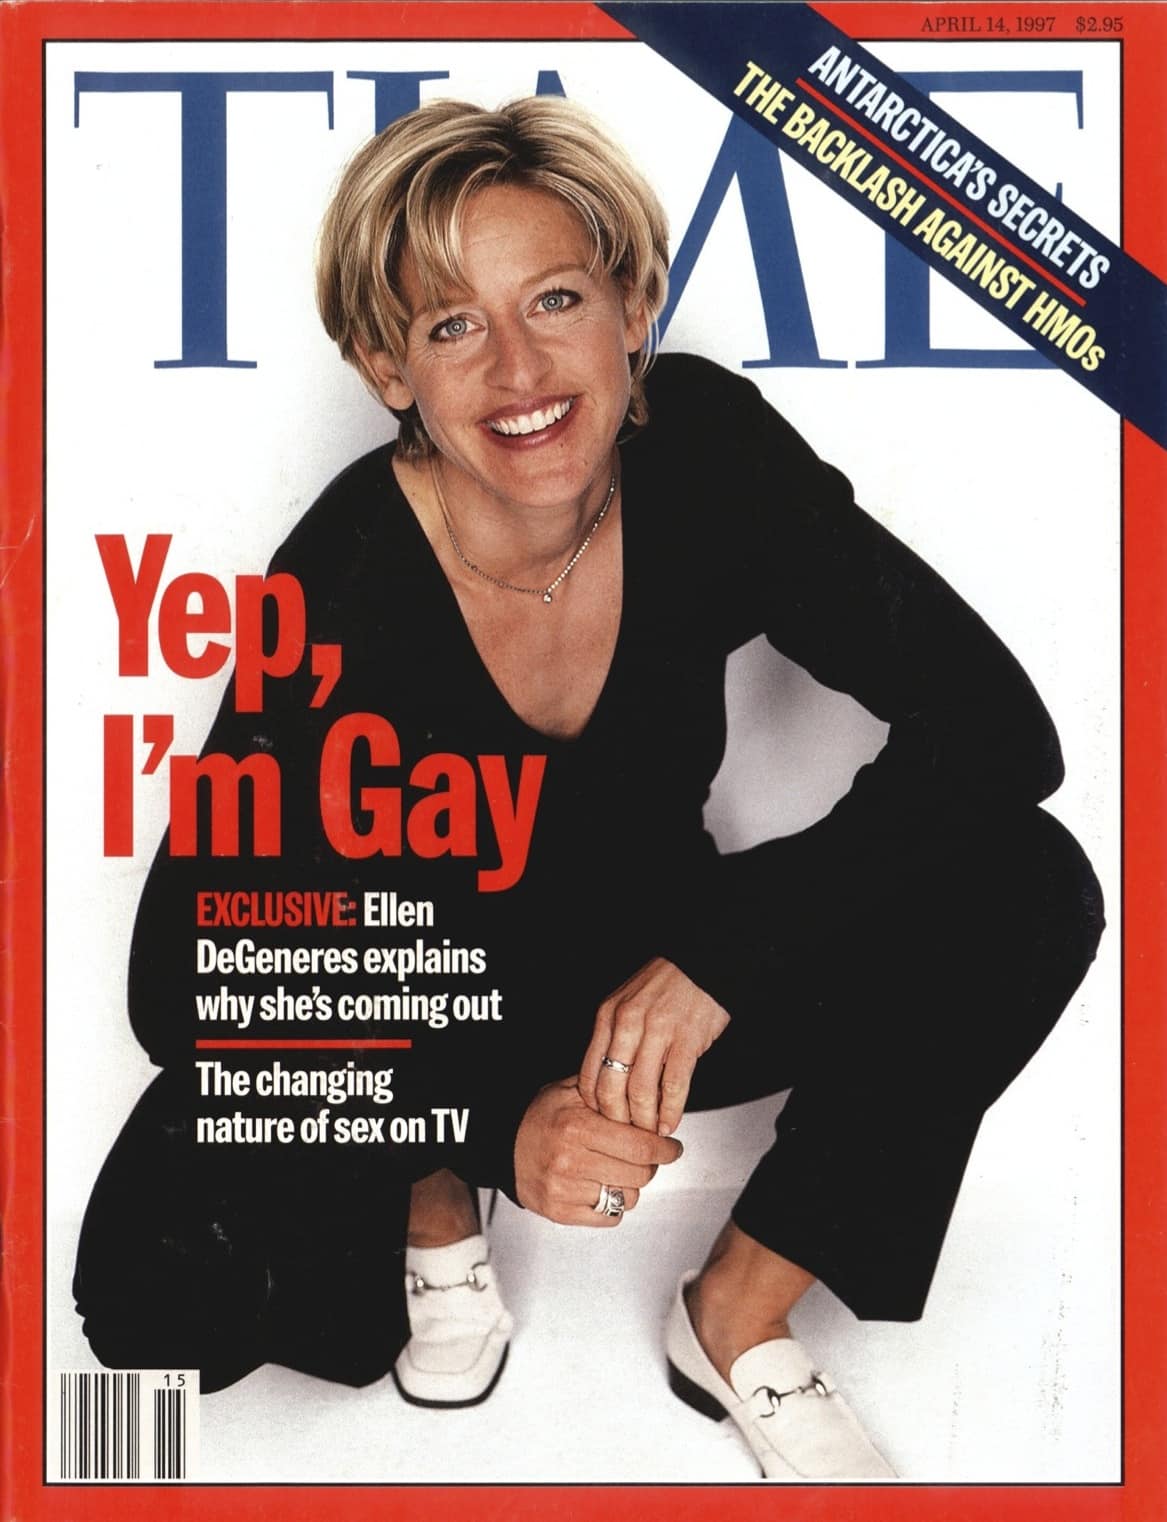 The cover of TIME magazine with a picture of Ellen DeGeneres and a headline of 'Yep, I'm Gay'.